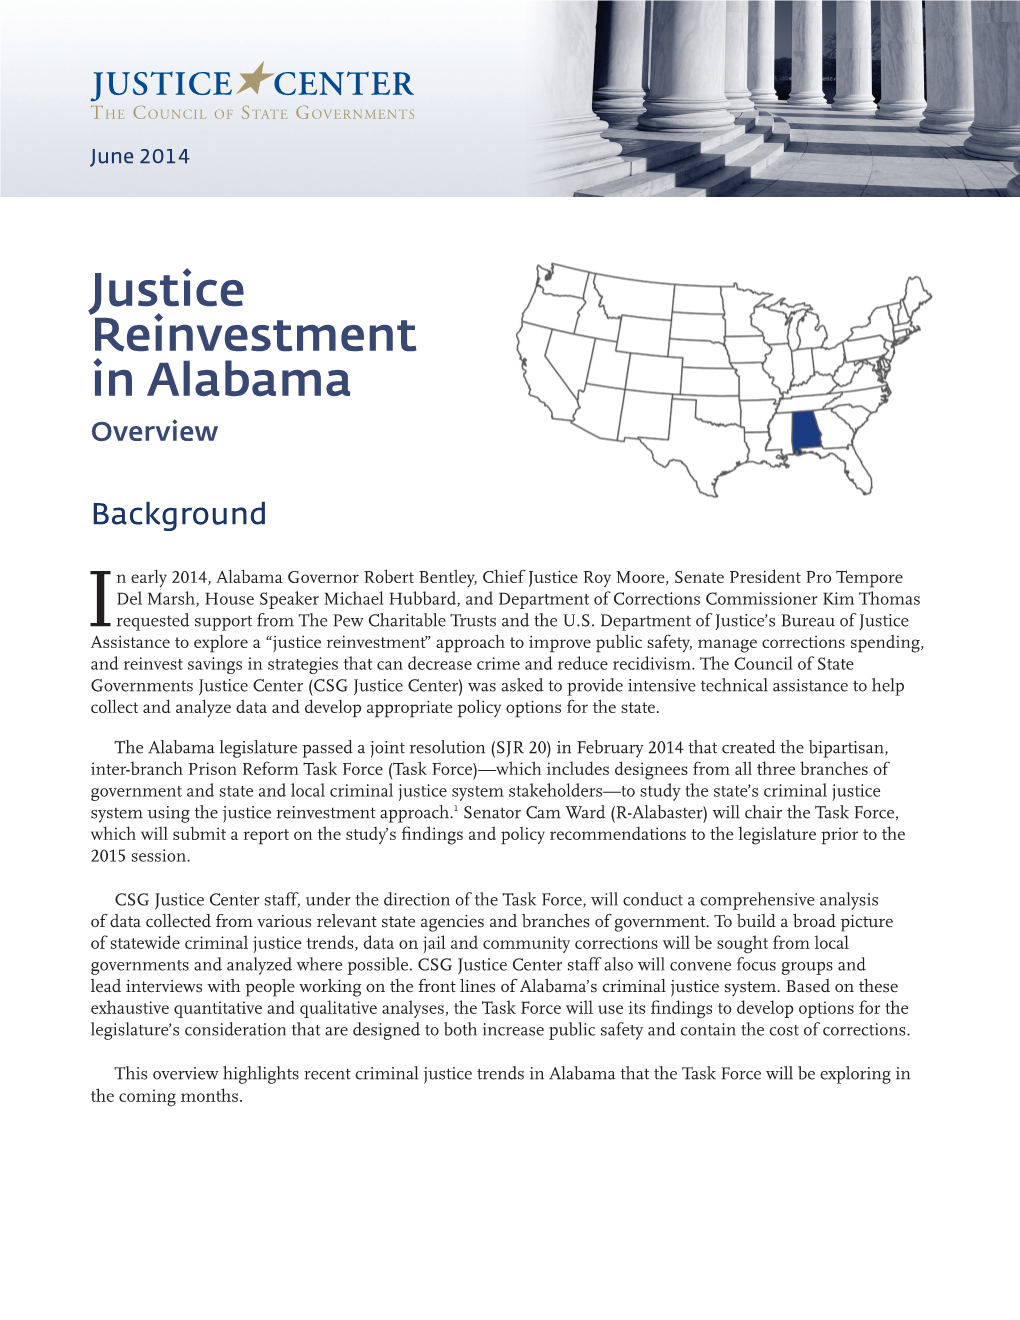 Justice Reinvestment in Alabama Overview